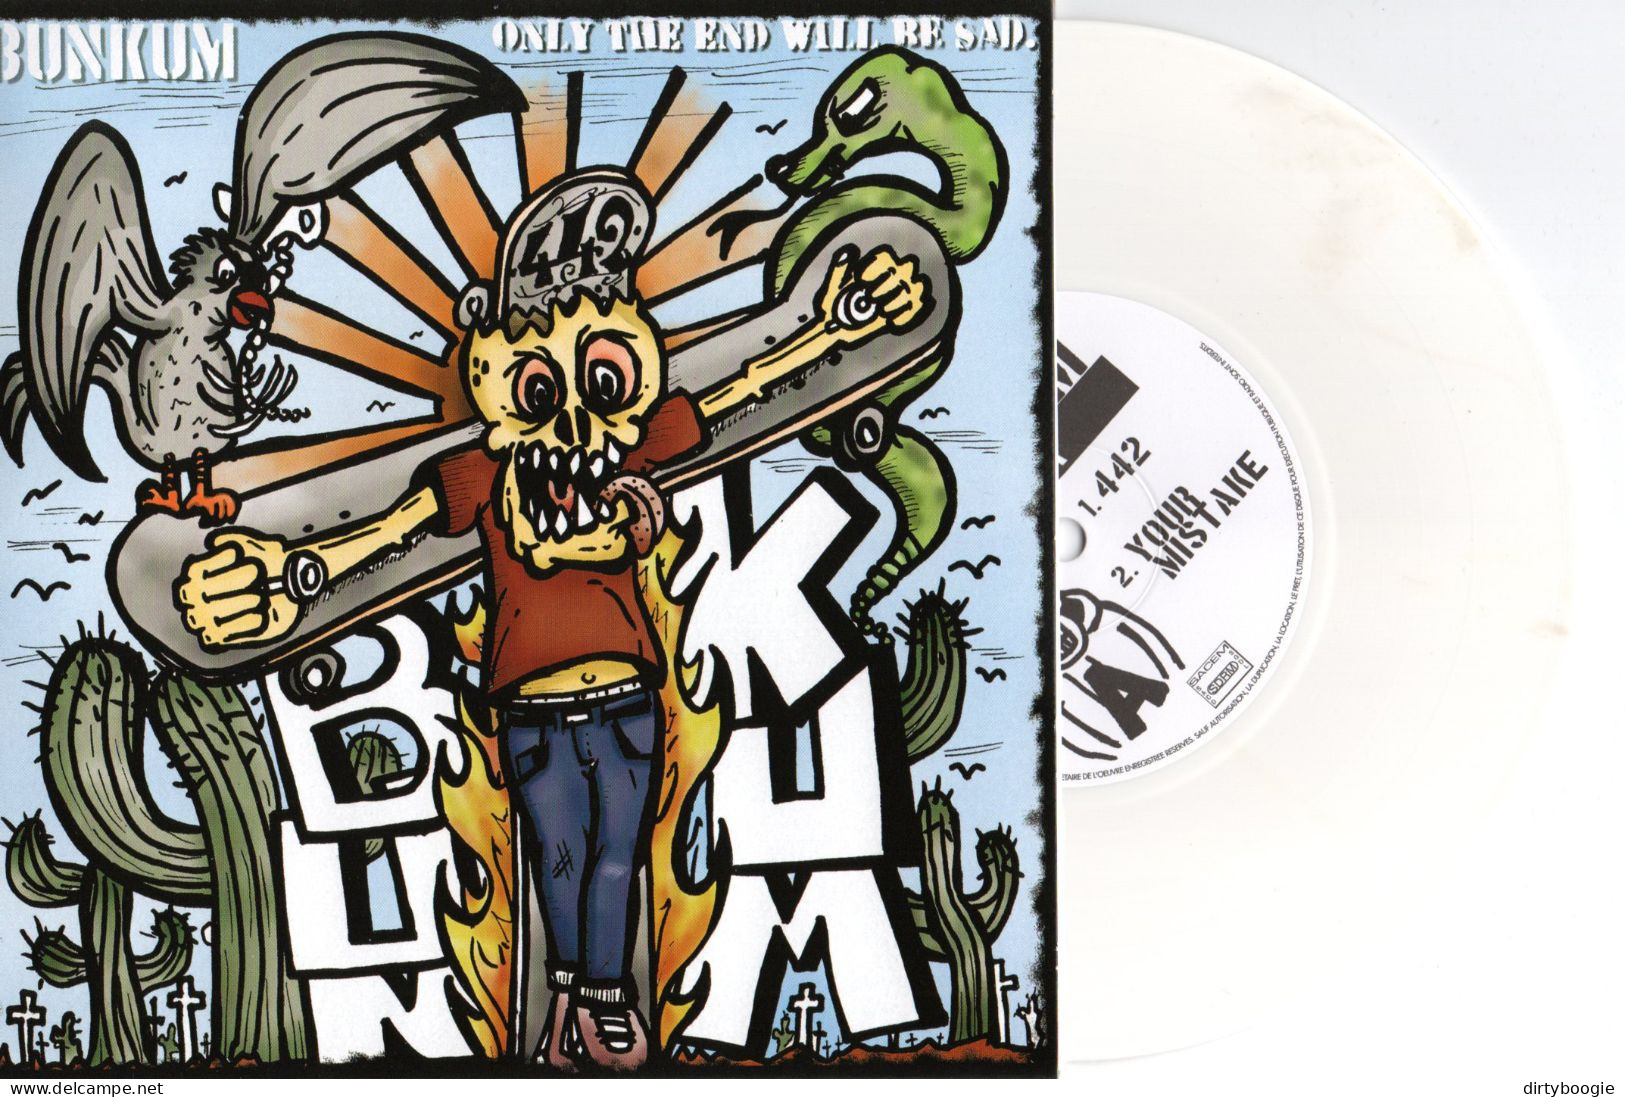 Bunkum - Only The End Will Be Sad - EP - Hardcore - Agnostic Front - Bad Brains - Vinyl Blanc - Punk